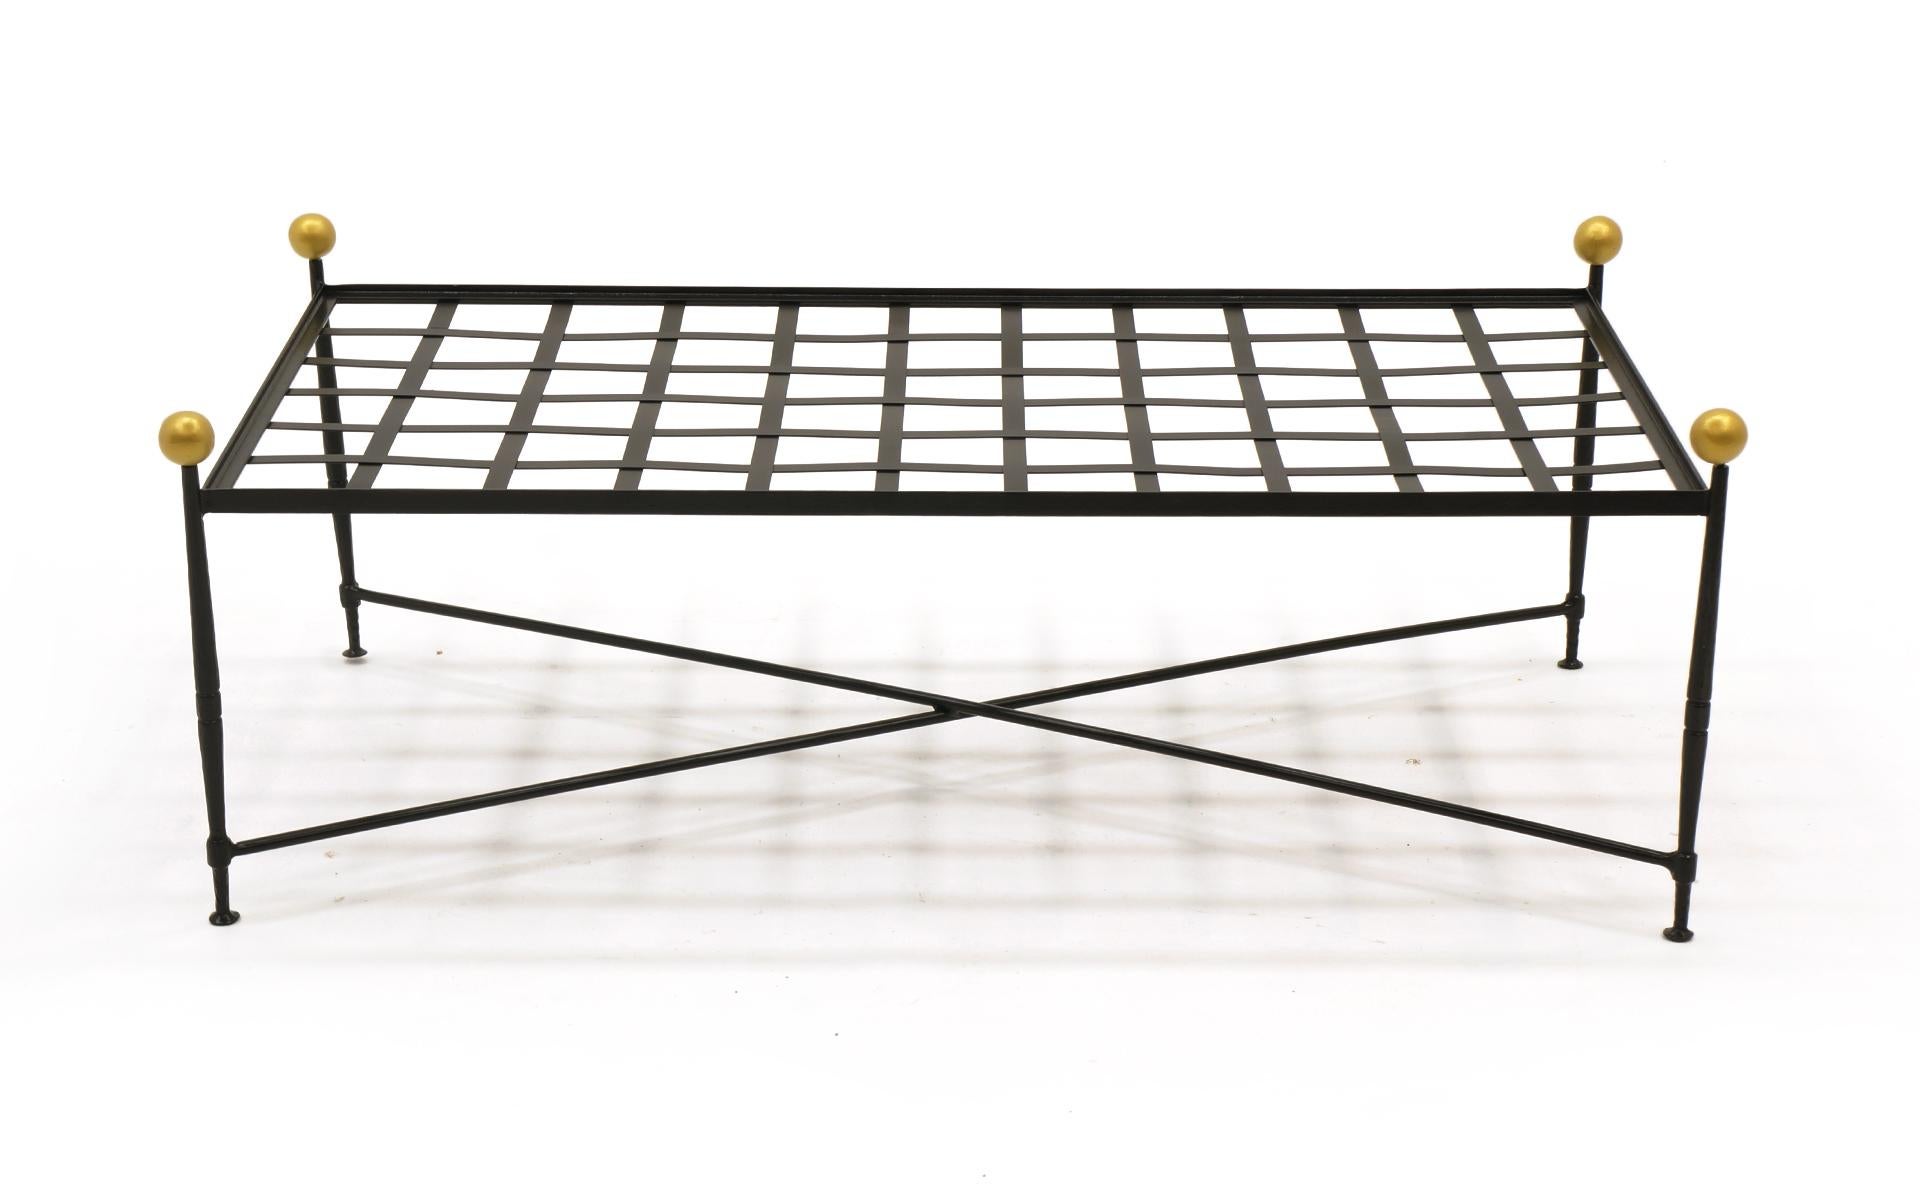 Patio coffee table (includes glass if so desired) or bench designed by Mario Papperzini for the John Salterini Company, 1950s. There is a lip around the edge for a glass top (which we are happy to include), however, this could also be used as a